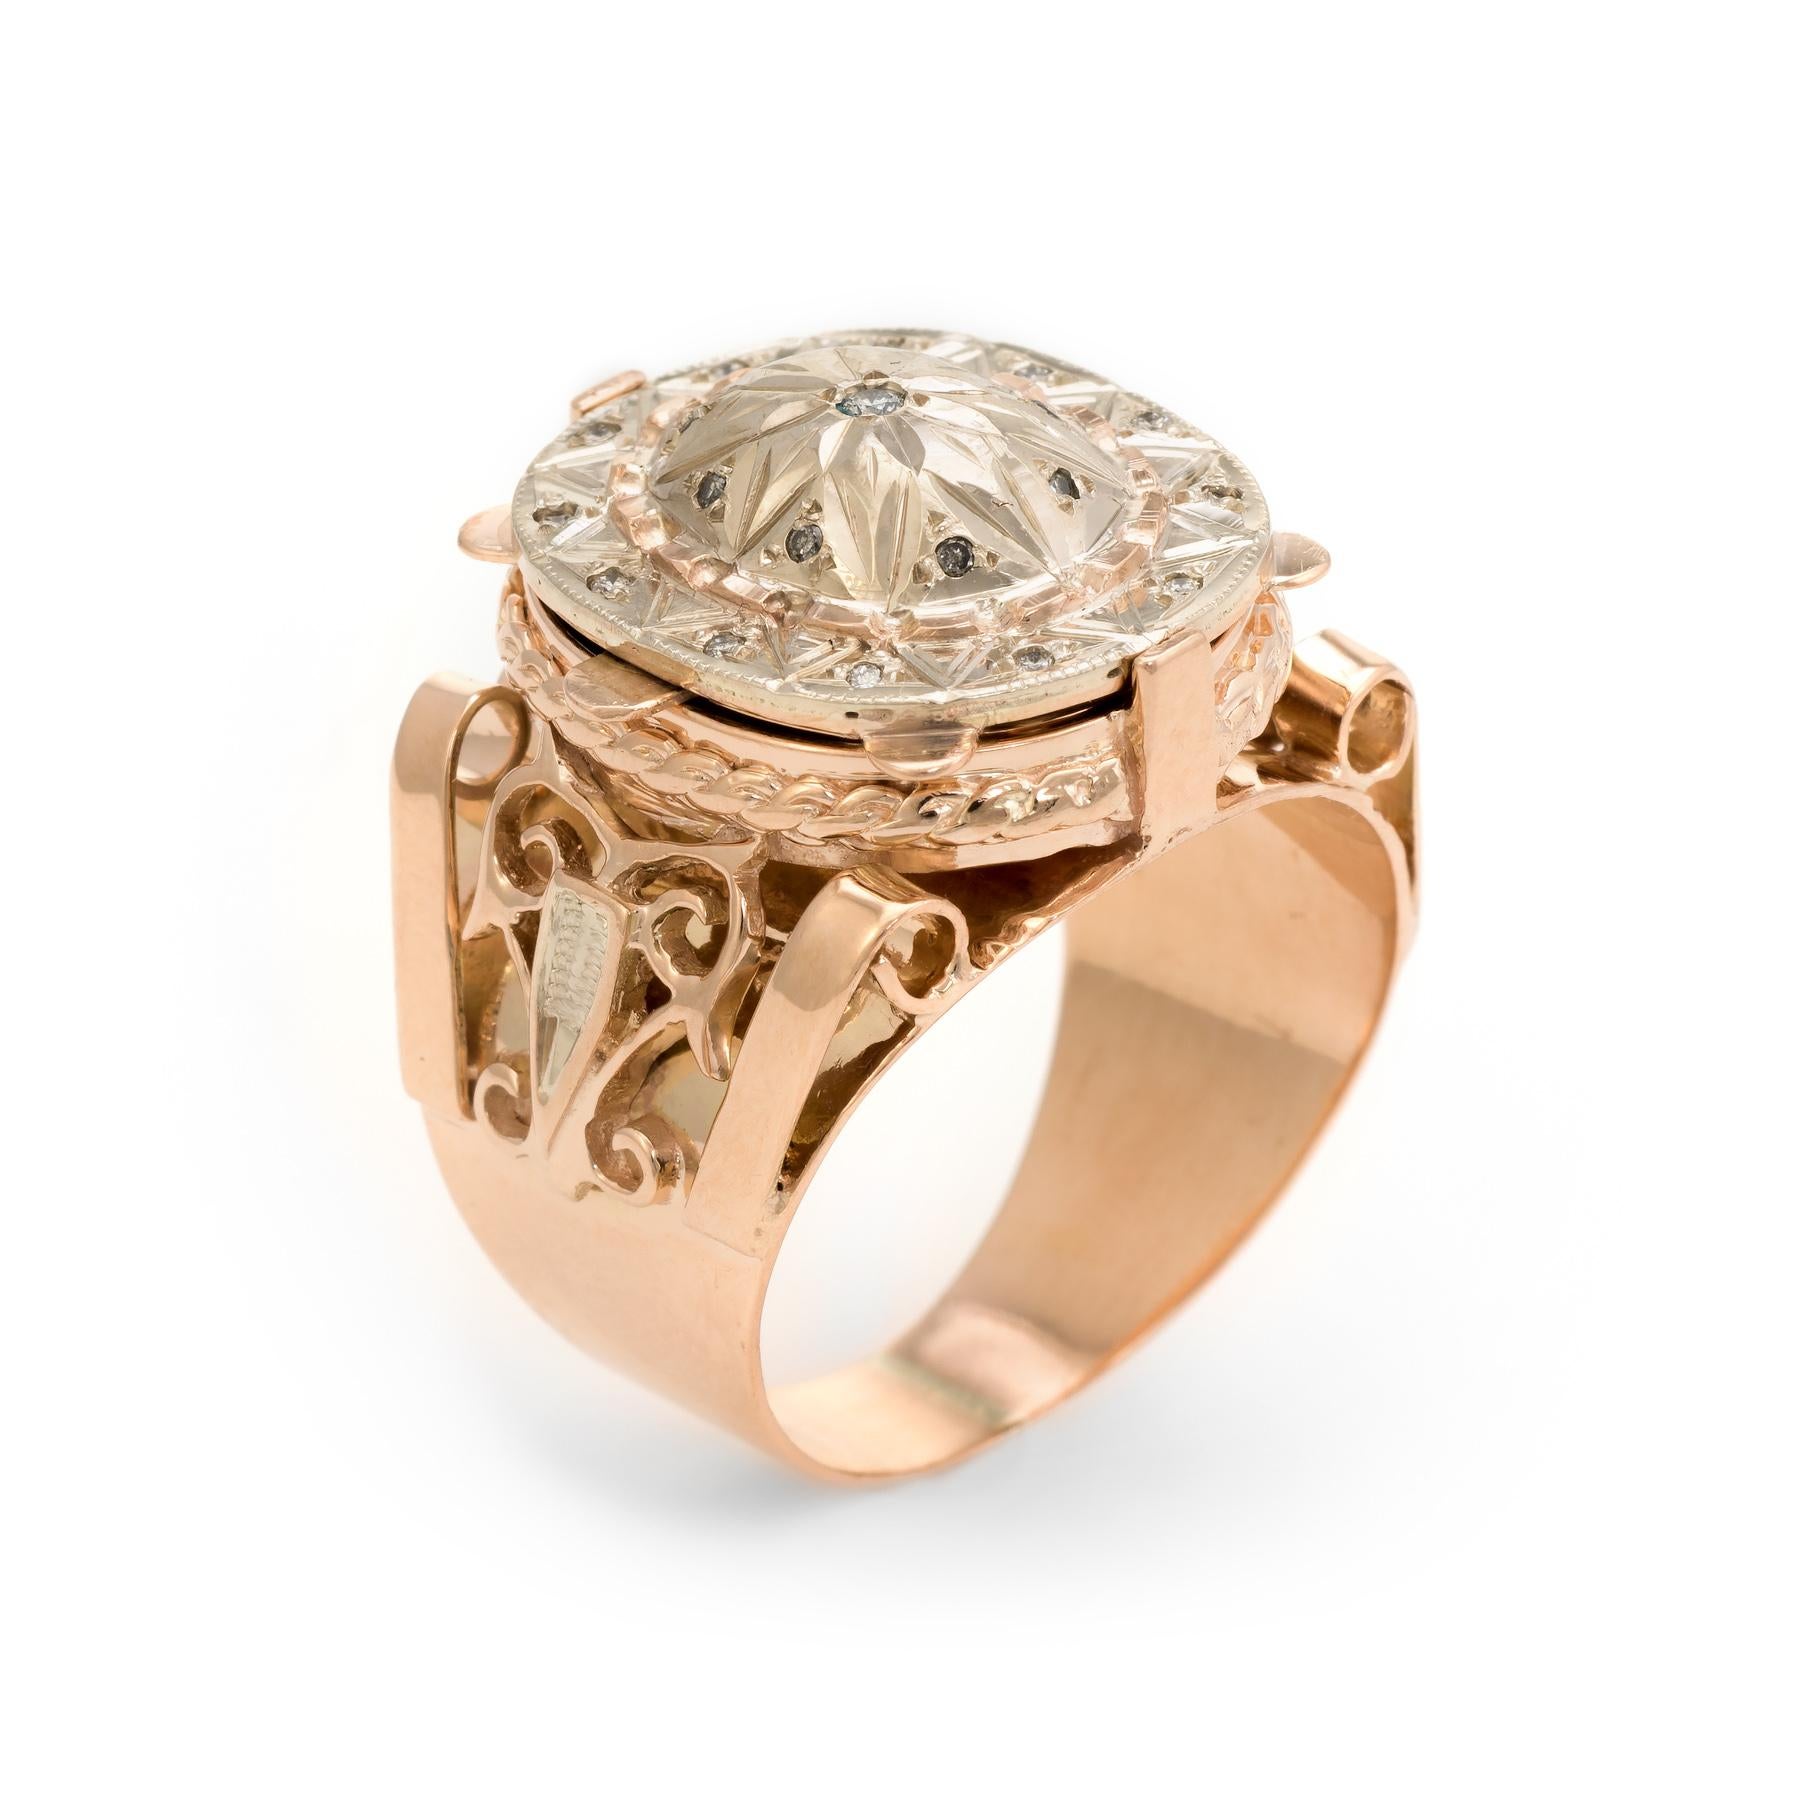 Striking vintage cocktail ring (circa 1960s), crafted in 14 karat rose & white gold. 

Diamonds total an estimated 0.08 carats (estimated at I-J color and SI2-I1 clarity). 

The ring features a hinged mount that opens to reveal a secret compartment.